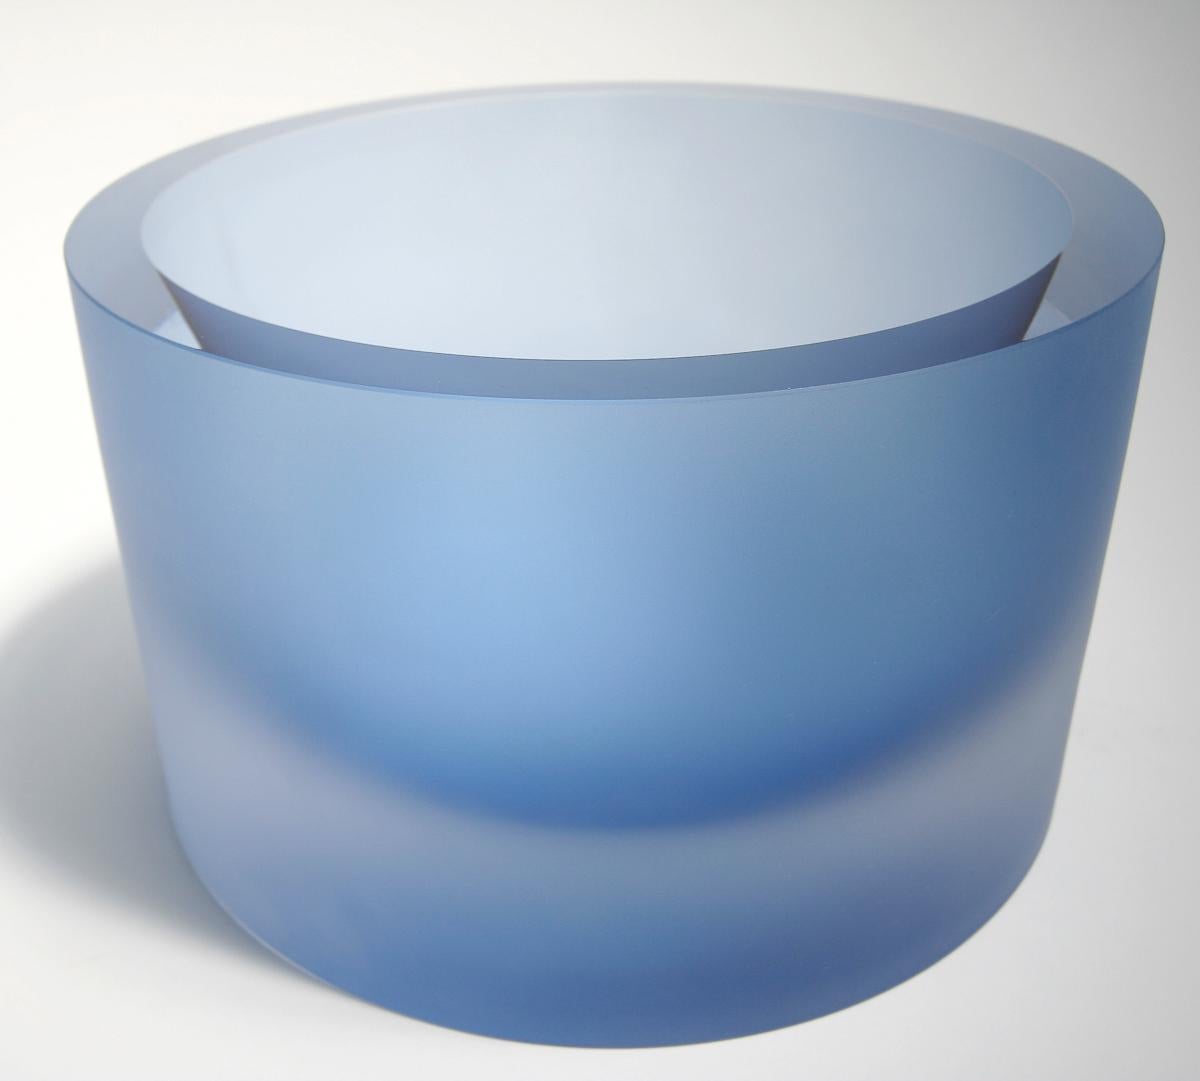 Anna Torfs Valenta Glass Bowl in Water Blue In New Condition For Sale In Los Angeles, CA